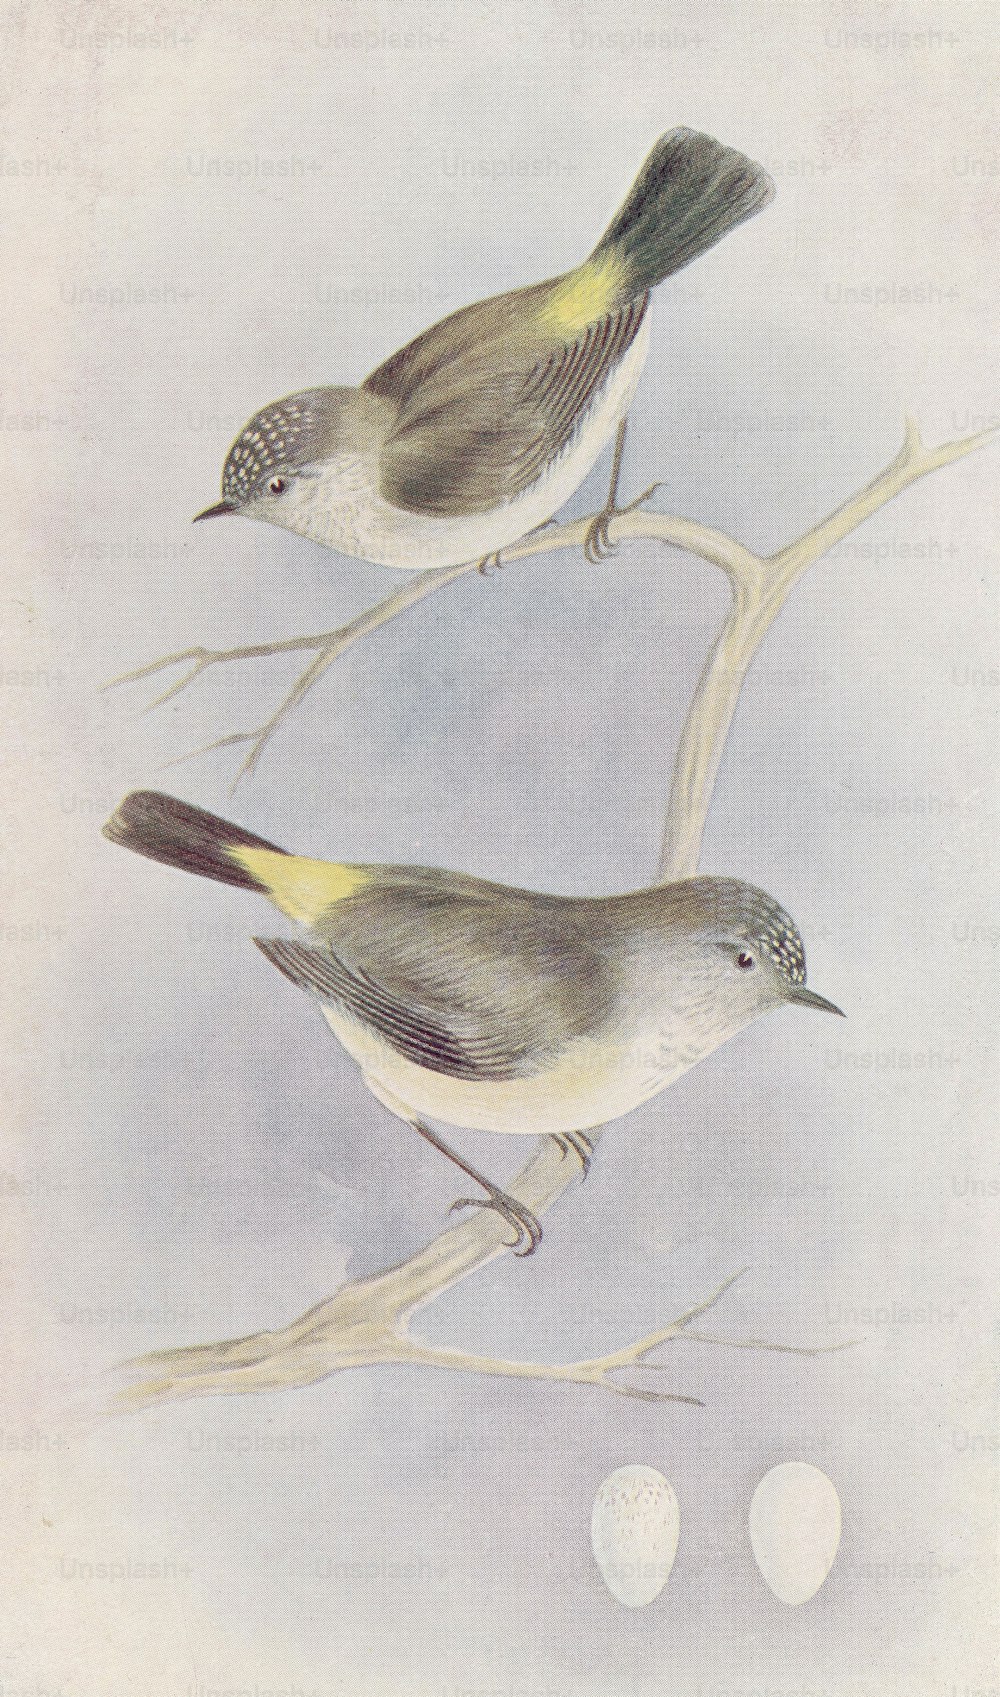 The yellow-rumped thornbill or tit (Acanthiza chrysorrhoea), circa 1850. Print by Quoy and Gaimard after a drawing by C. C. Brittlebank. (Photo by Hulton Archive/Getty Images)